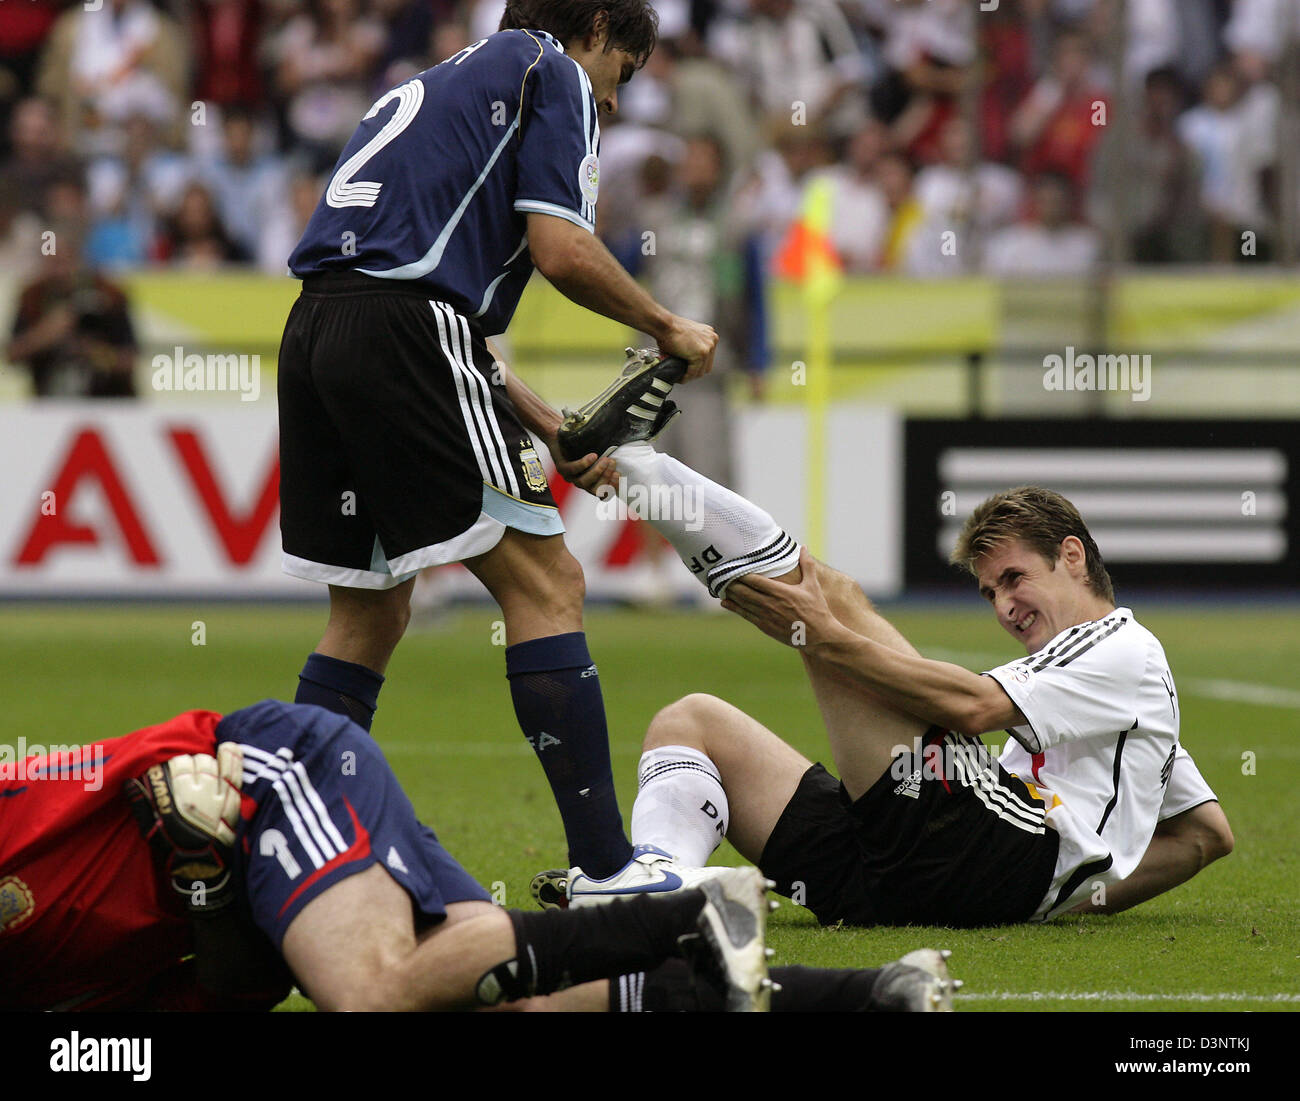 Miroslav Klose of Germany (R) is helped by Roberto Ayala (L) of Argentina during the quarter final of the 2006 FIFA World Cup between Germany and Argentina in the Olympic stadium in Berlin, Germany, Friday, 30 June 2006. In the foreground injured Argentinian goalkeeper Roberto Abbondanzieri. Photo: JENS WOLF +++ Mobile Services OUT +++ Please refer to FIFA's Terms and Conditions. Stock Photo